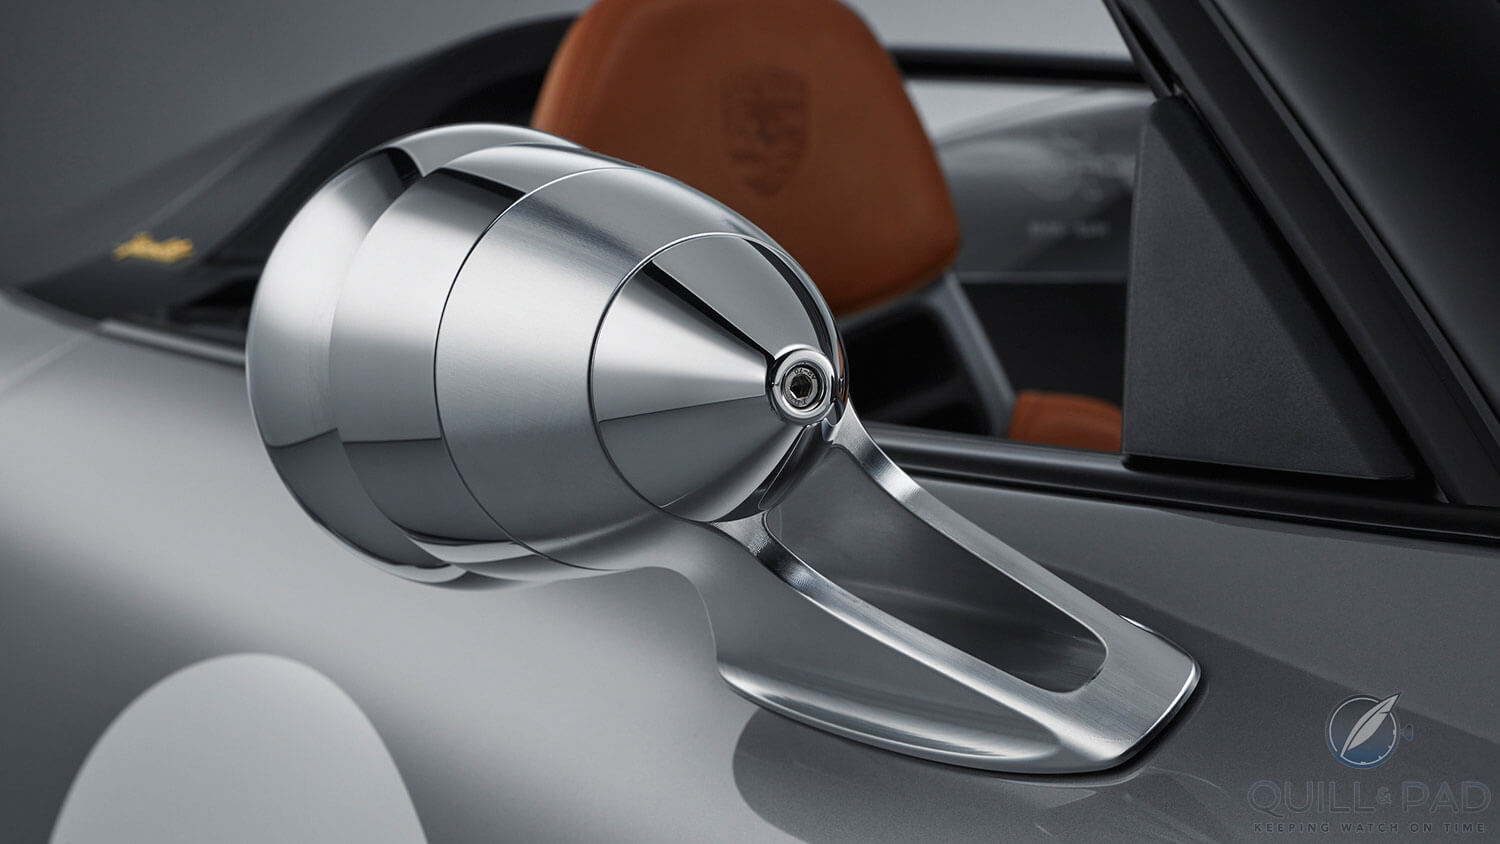 Beautifully executed wing mirror on the Porsche 911 Speedster Concept